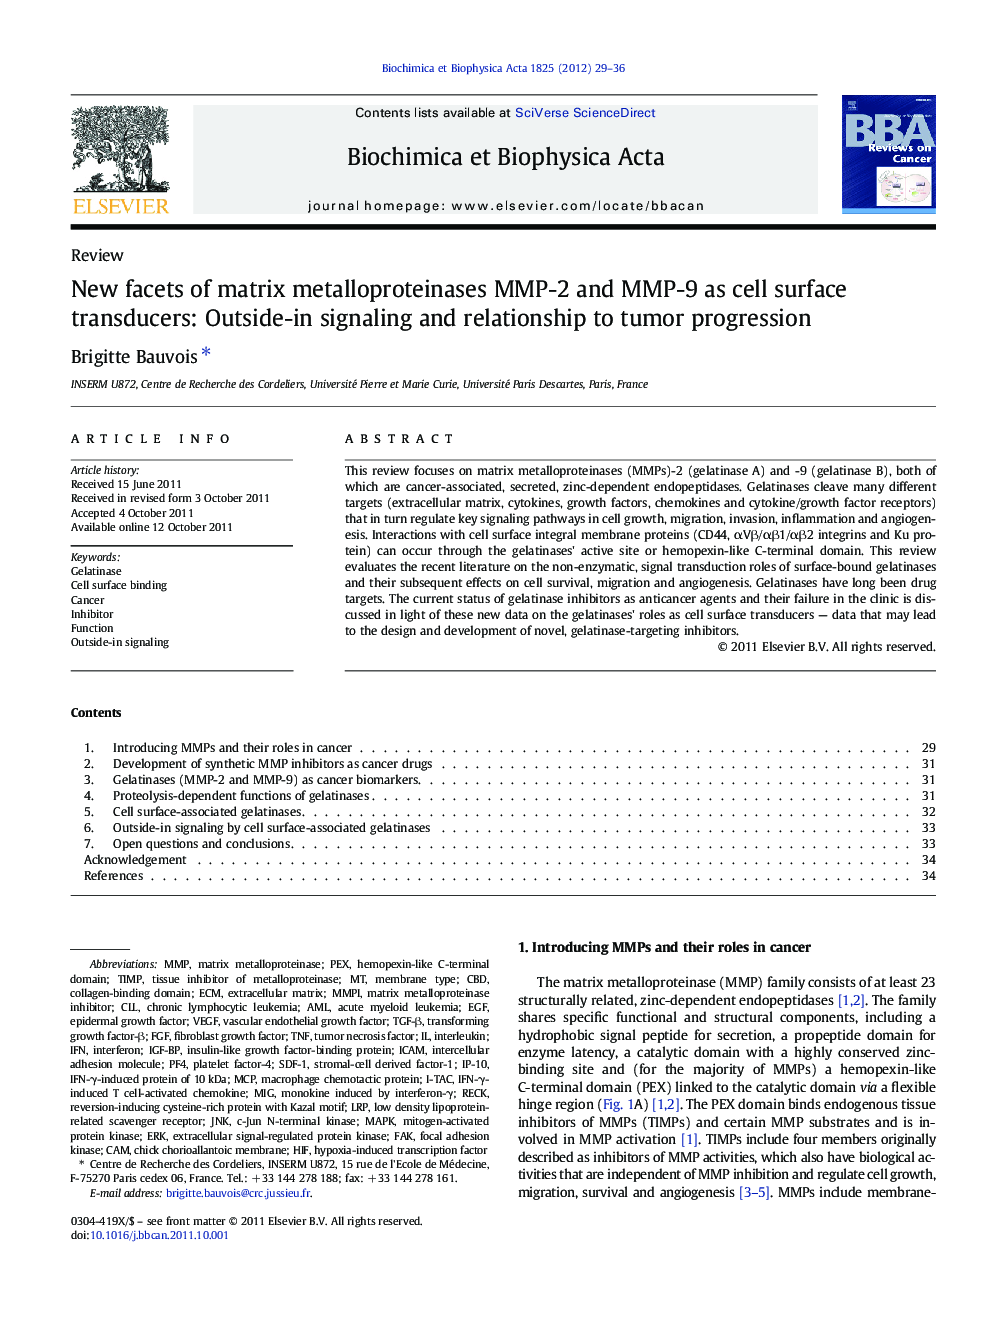 New facets of matrix metalloproteinases MMP-2 and MMP-9 as cell surface transducers: Outside-in signaling and relationship to tumor progression